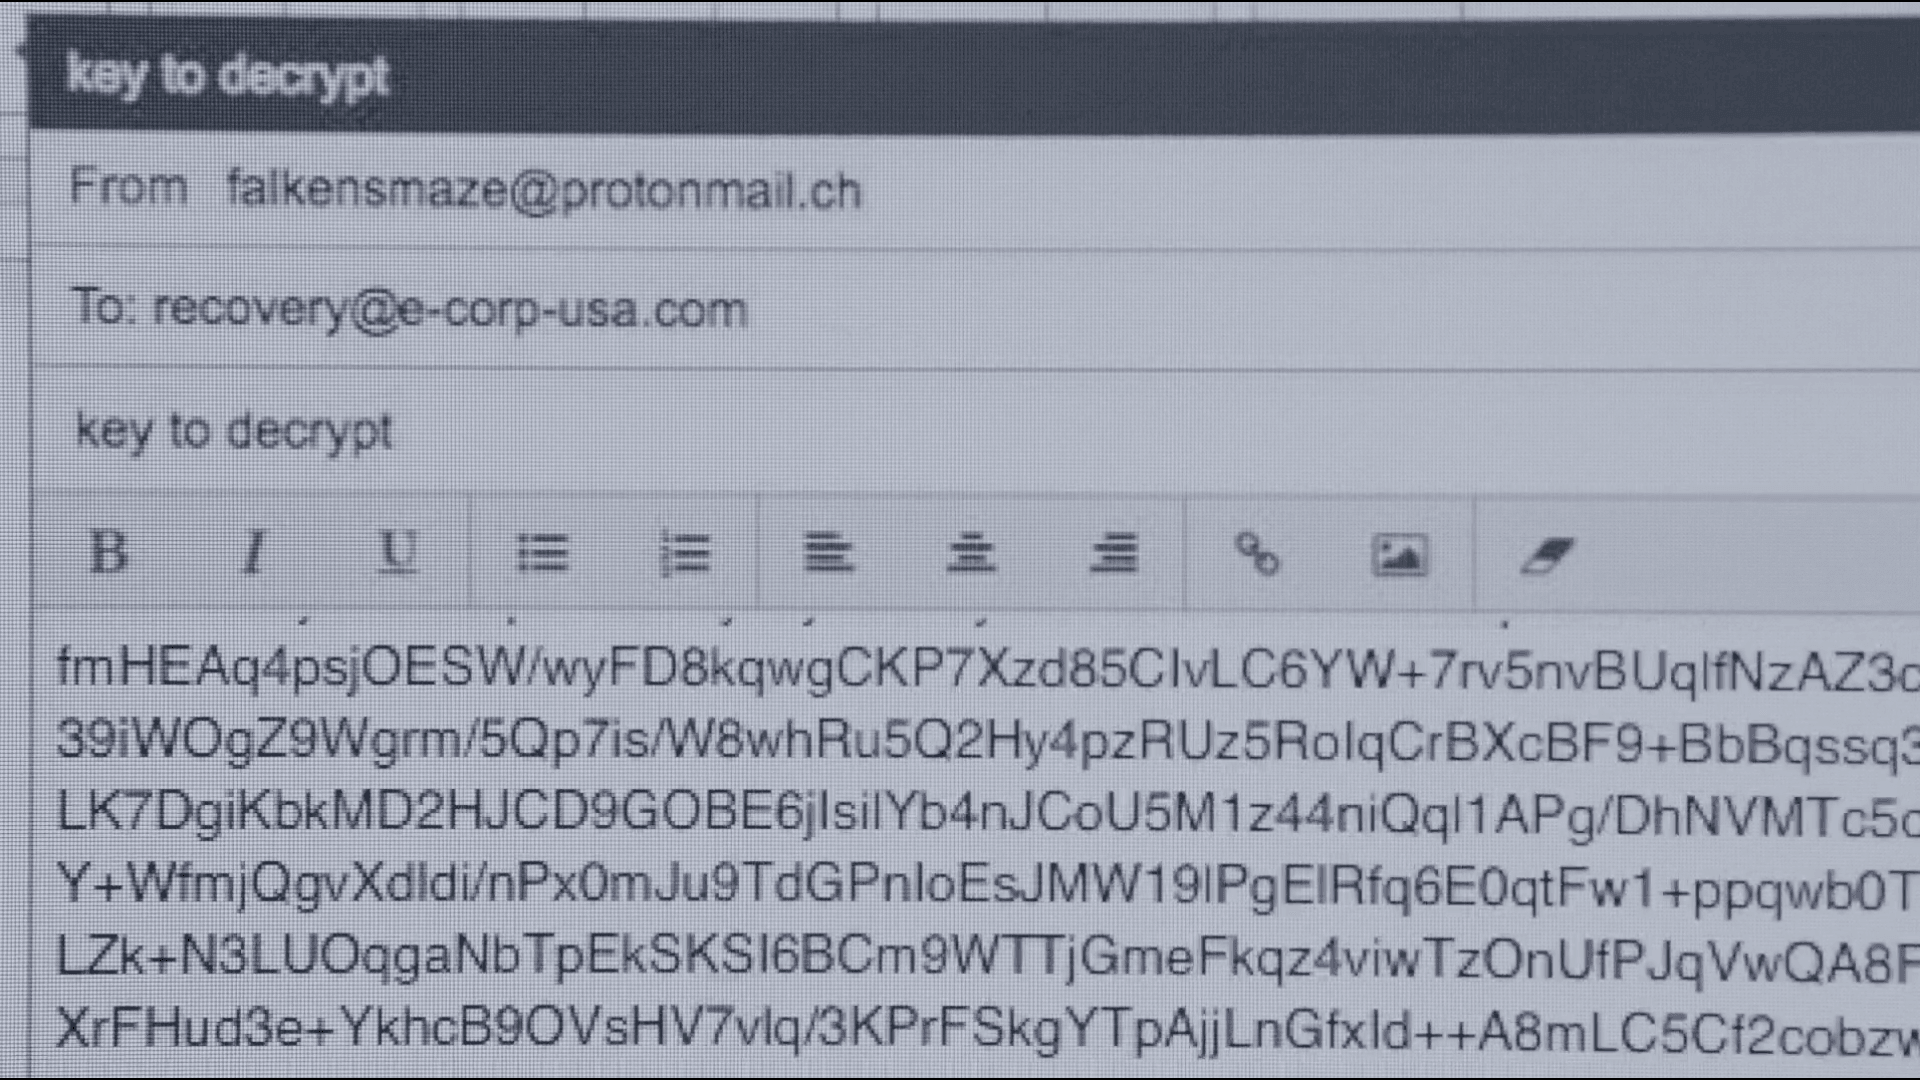 mr robot email private key